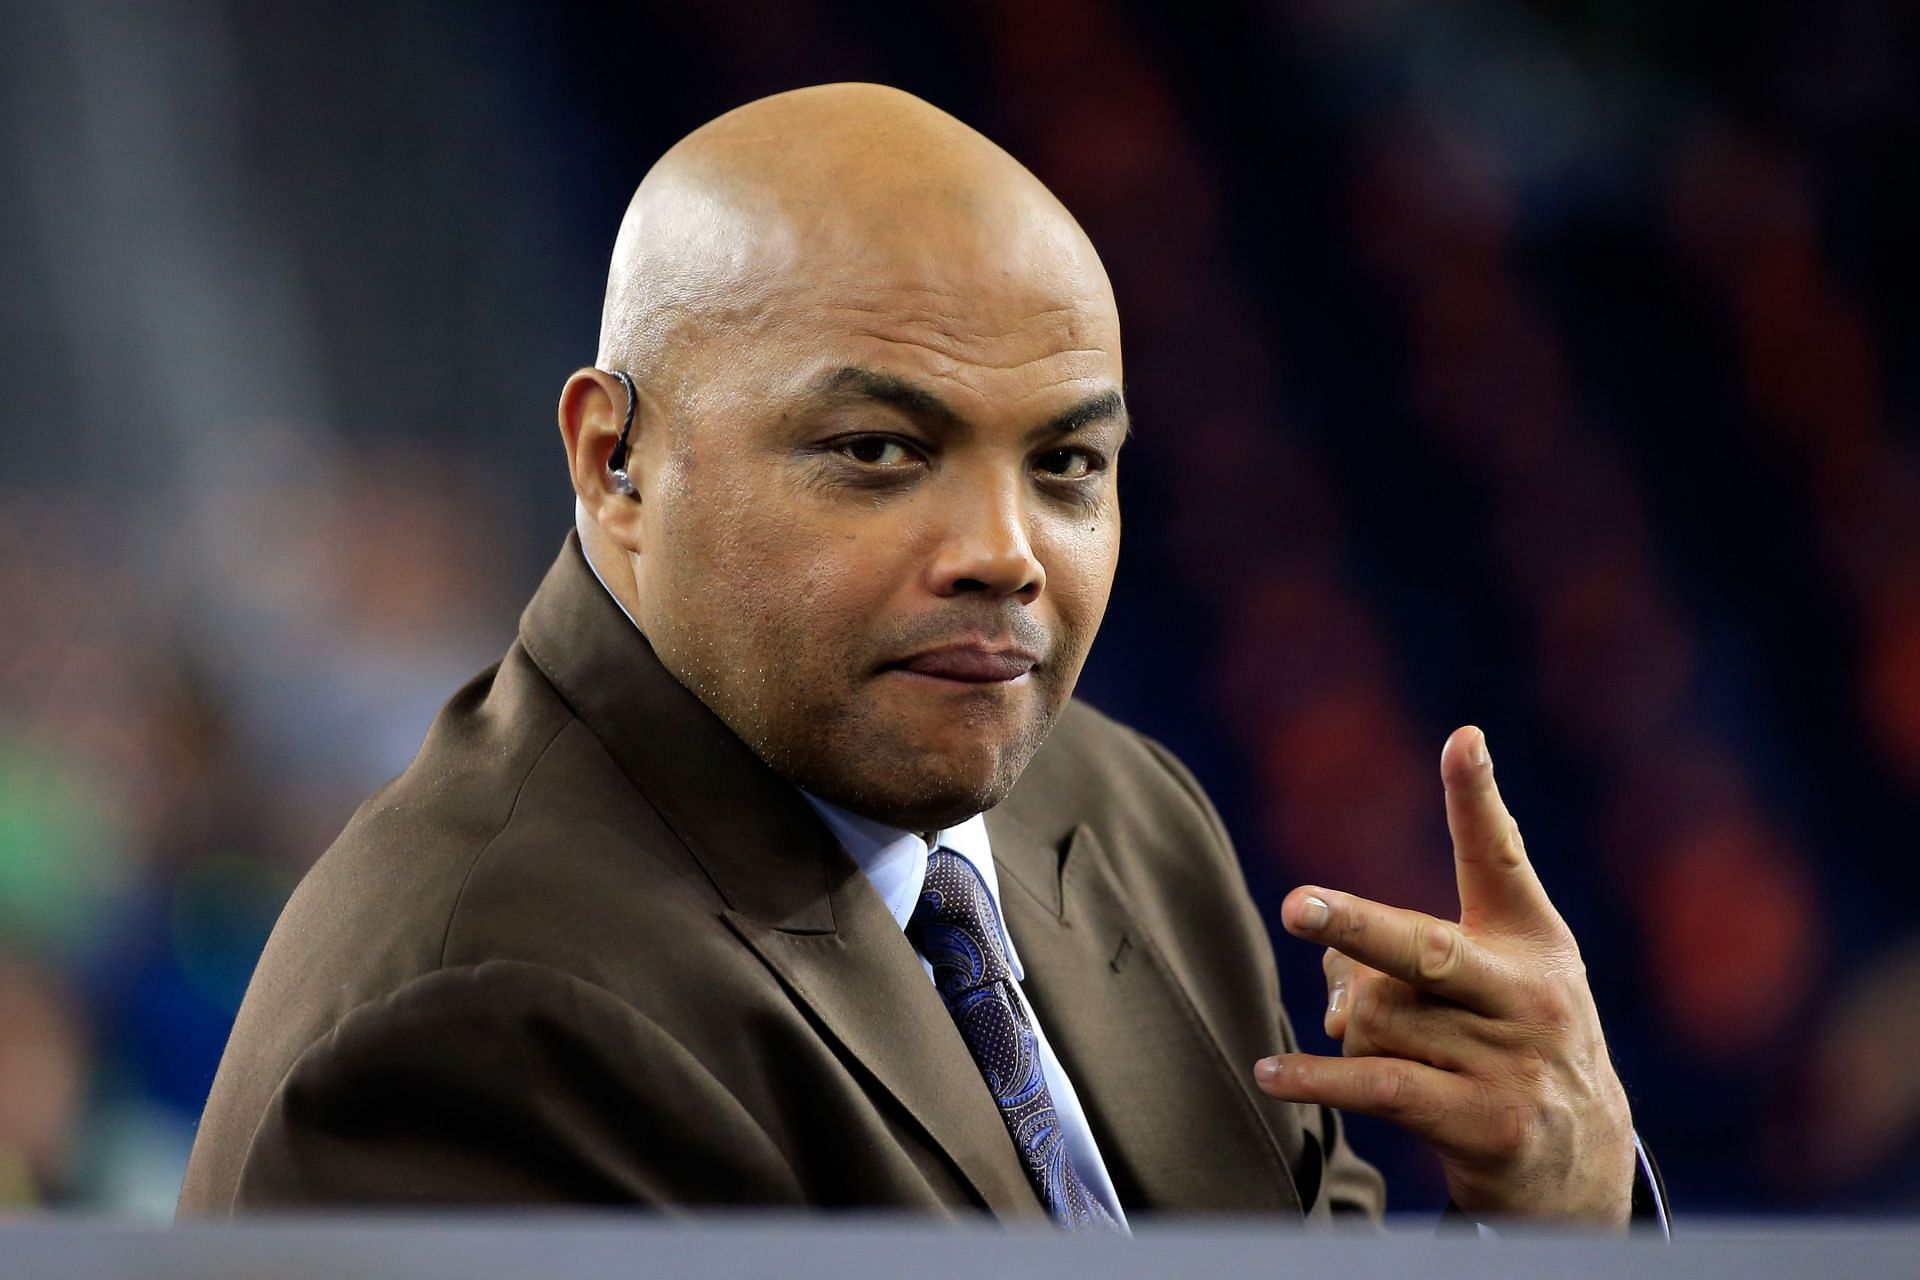 Charles Barkley got a reaction from the fans during their pregame.